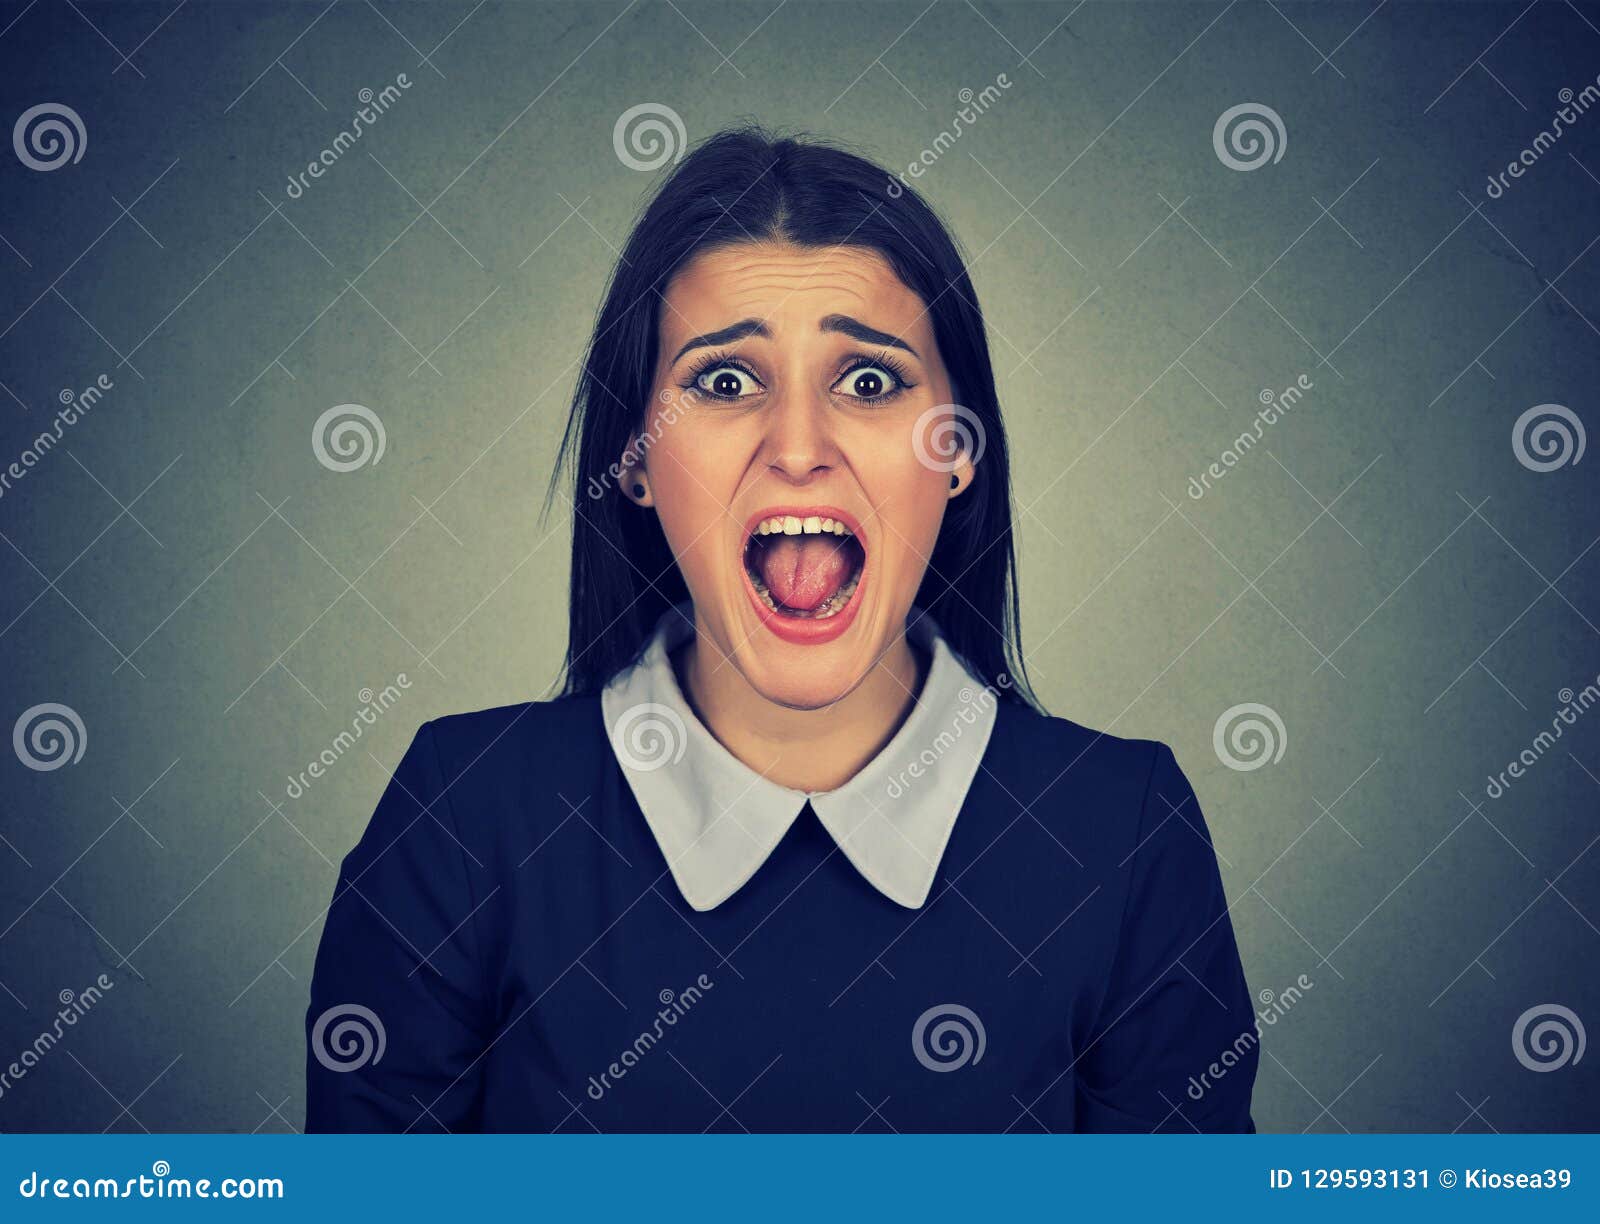 Angry Woman Screaming At Camera Stock Image Image Of Frustration